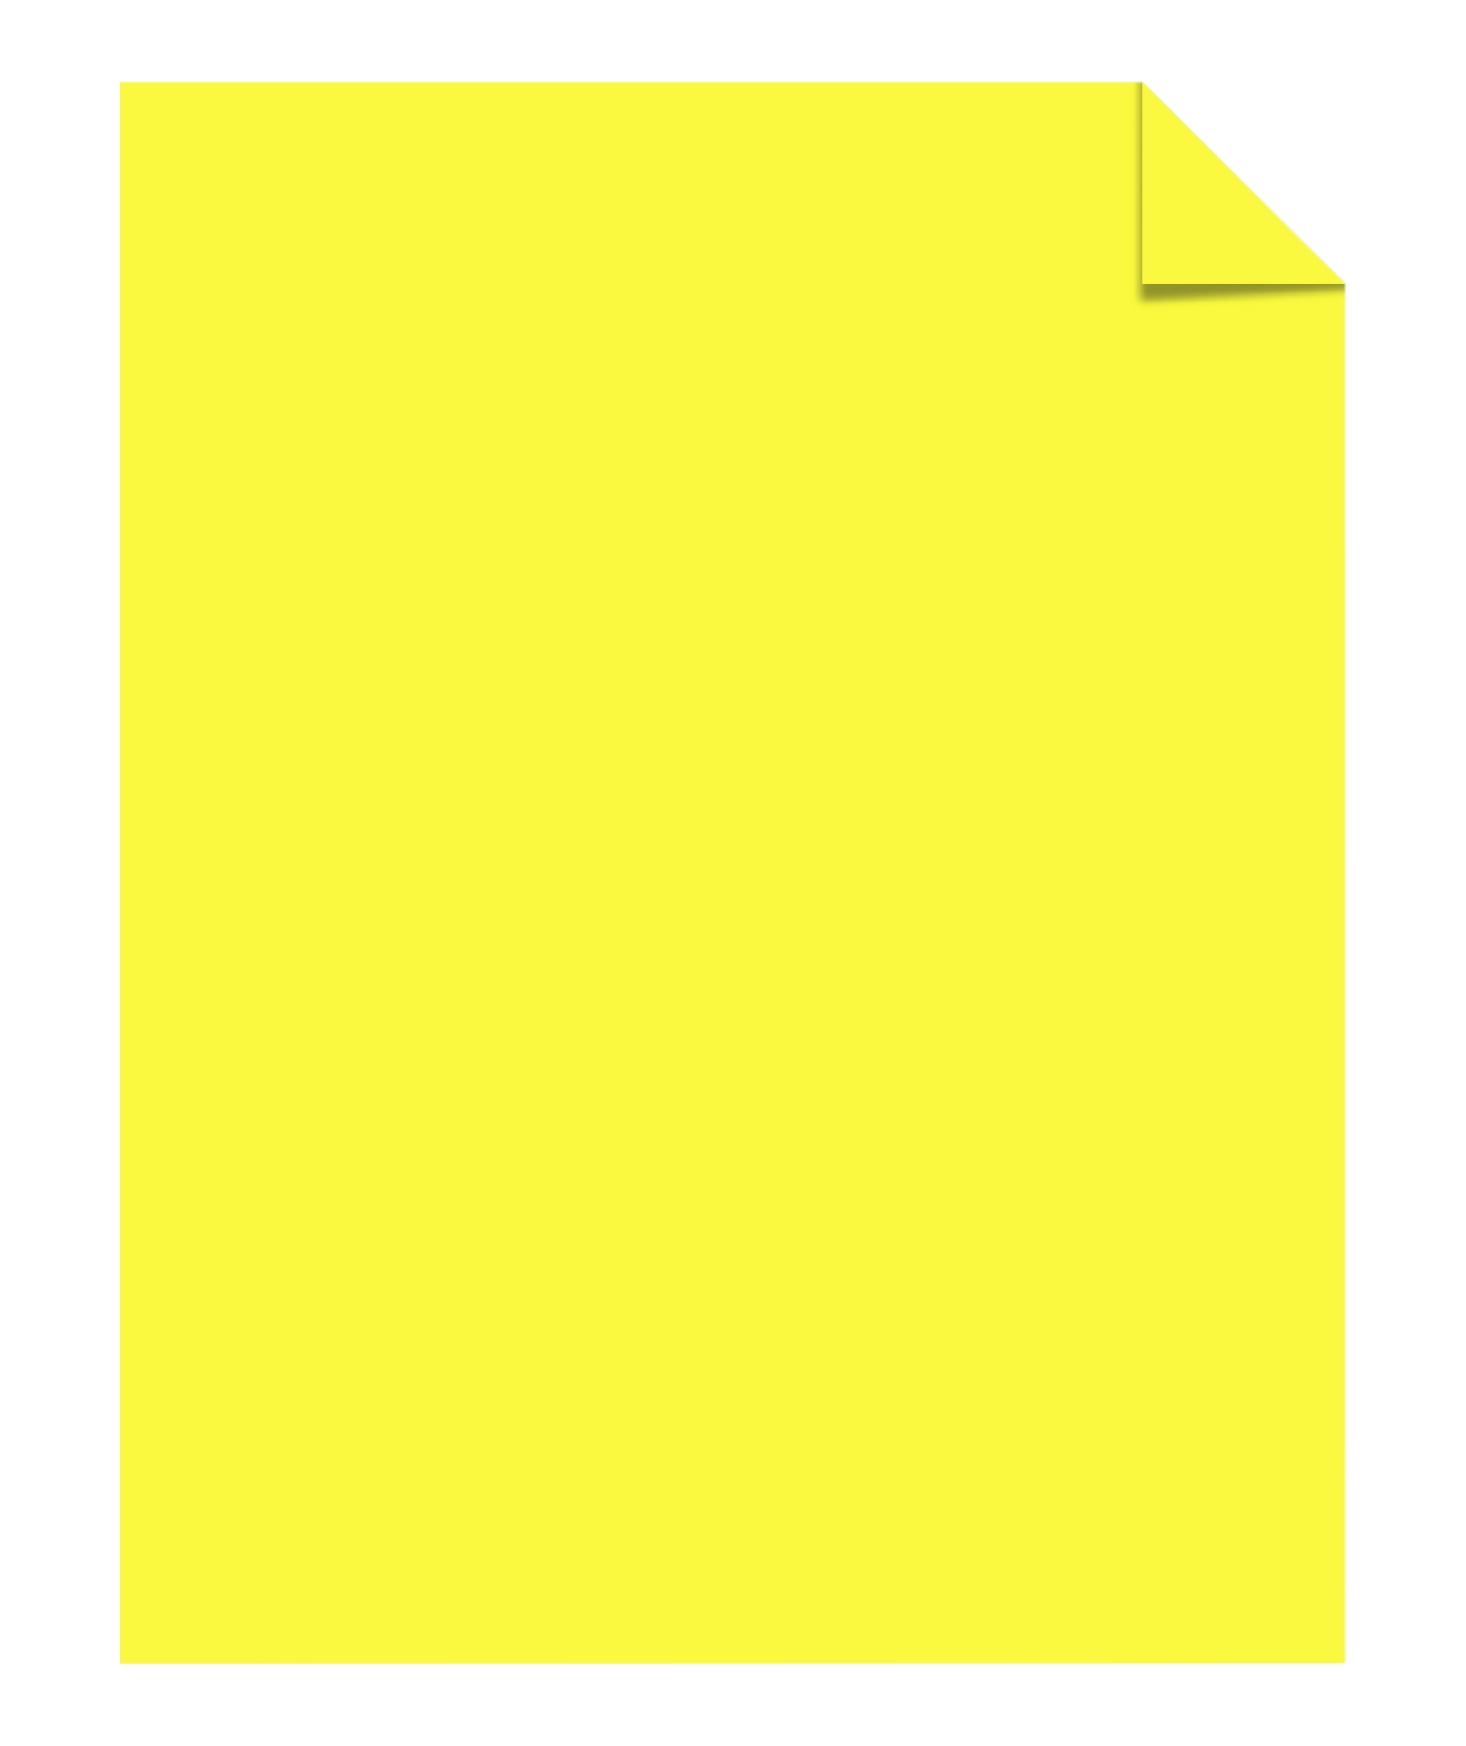 Astrobrights Colored Cardstock, Lift-Off Lemon Yellow, 8.5 X 11